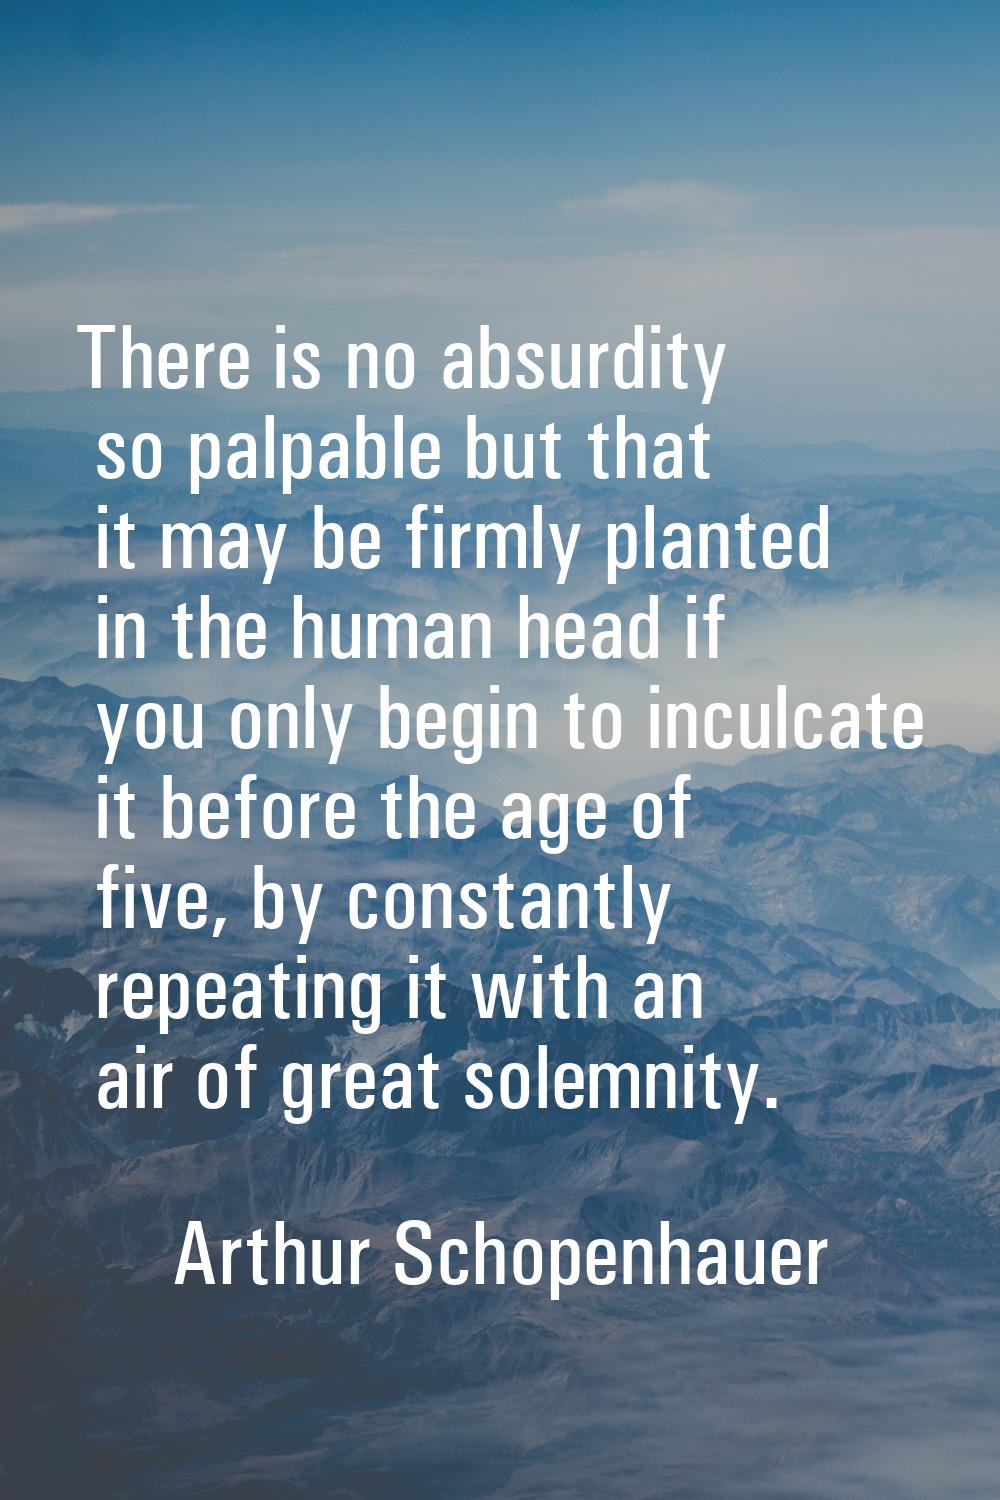 There is no absurdity so palpable but that it may be firmly planted in the human head if you only b